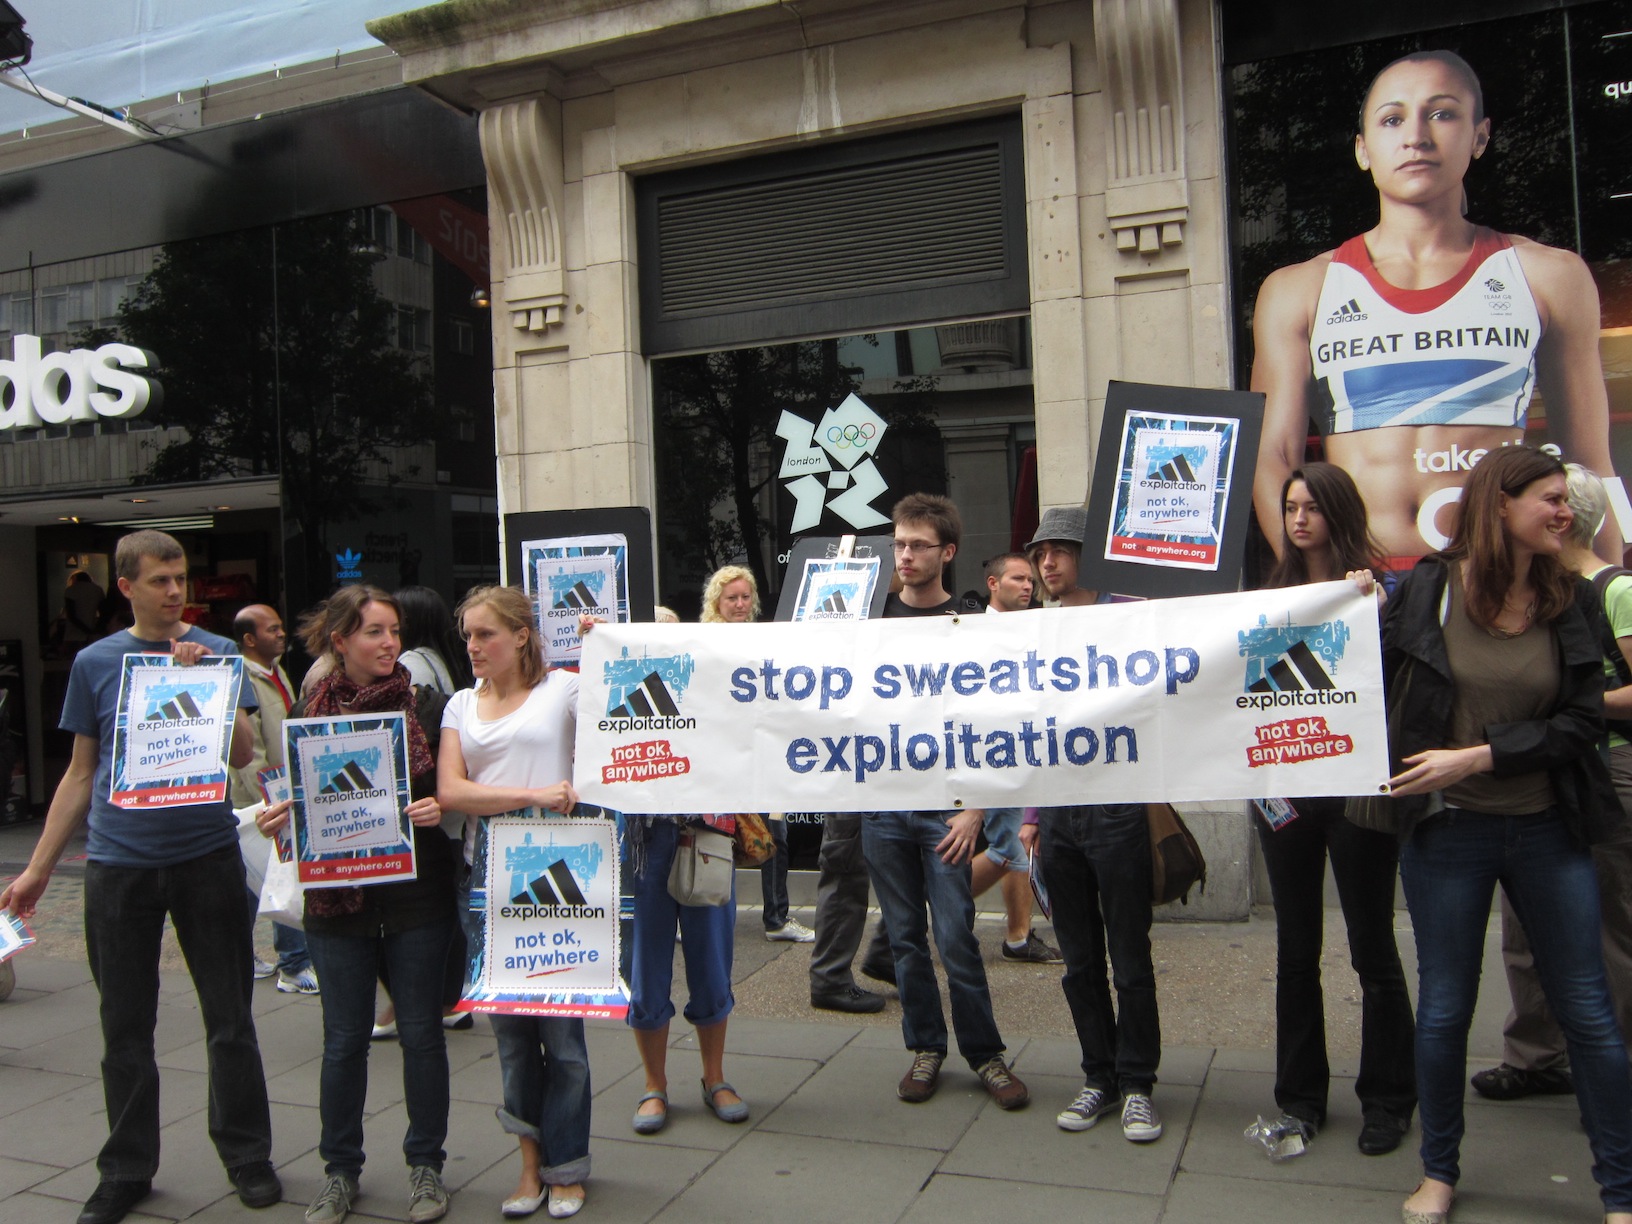 Activists protested some of the corporate sponsors at the London 2012 Games.